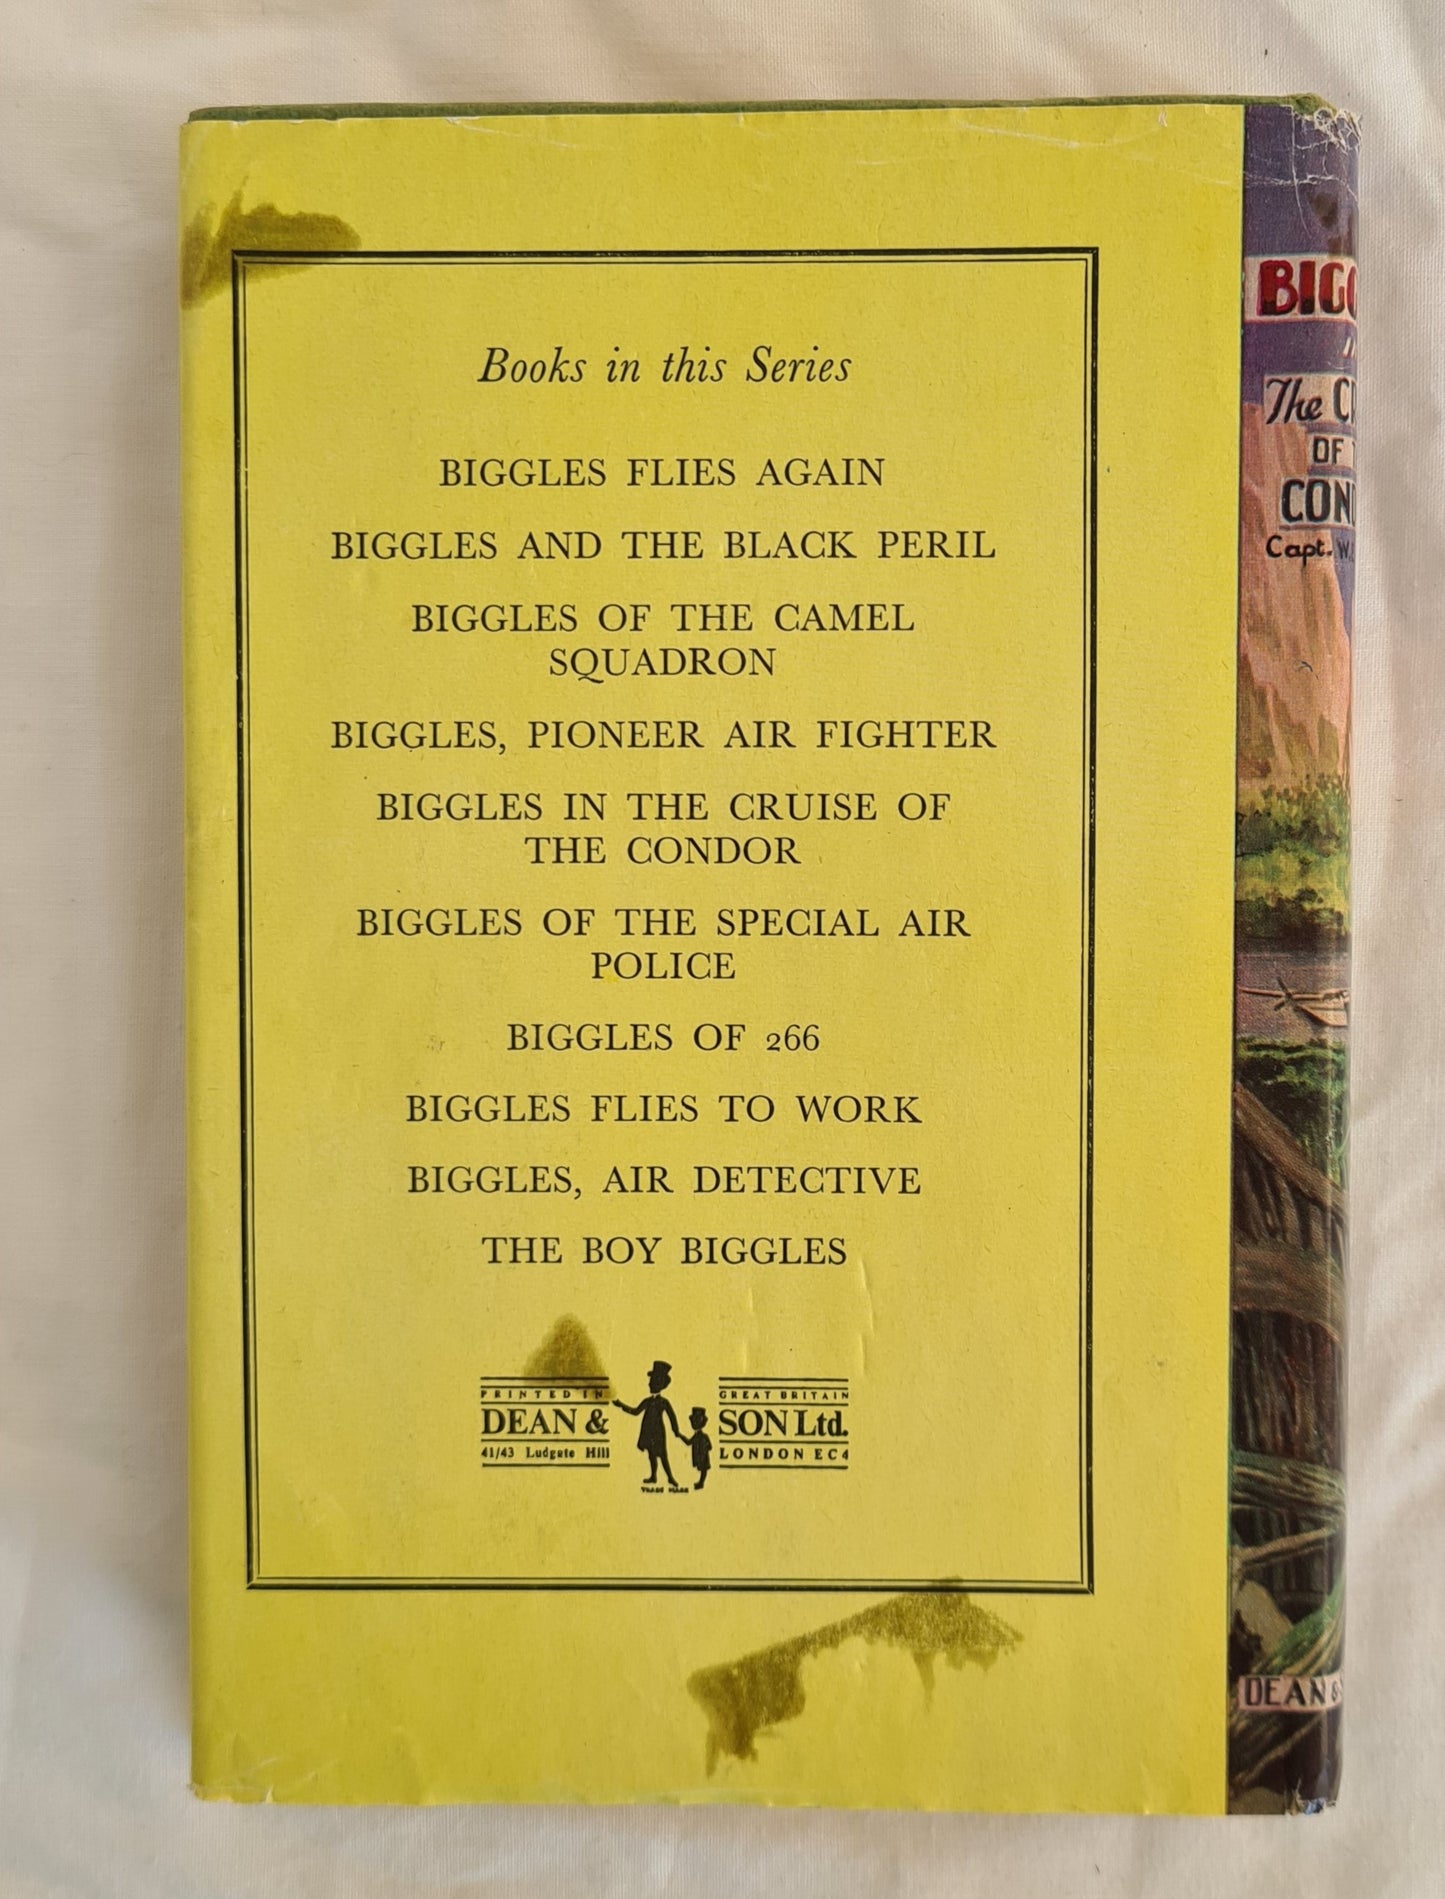 Biggles in the Cruise of the Condor by Capt. W. E. Johns (no inscriptions)